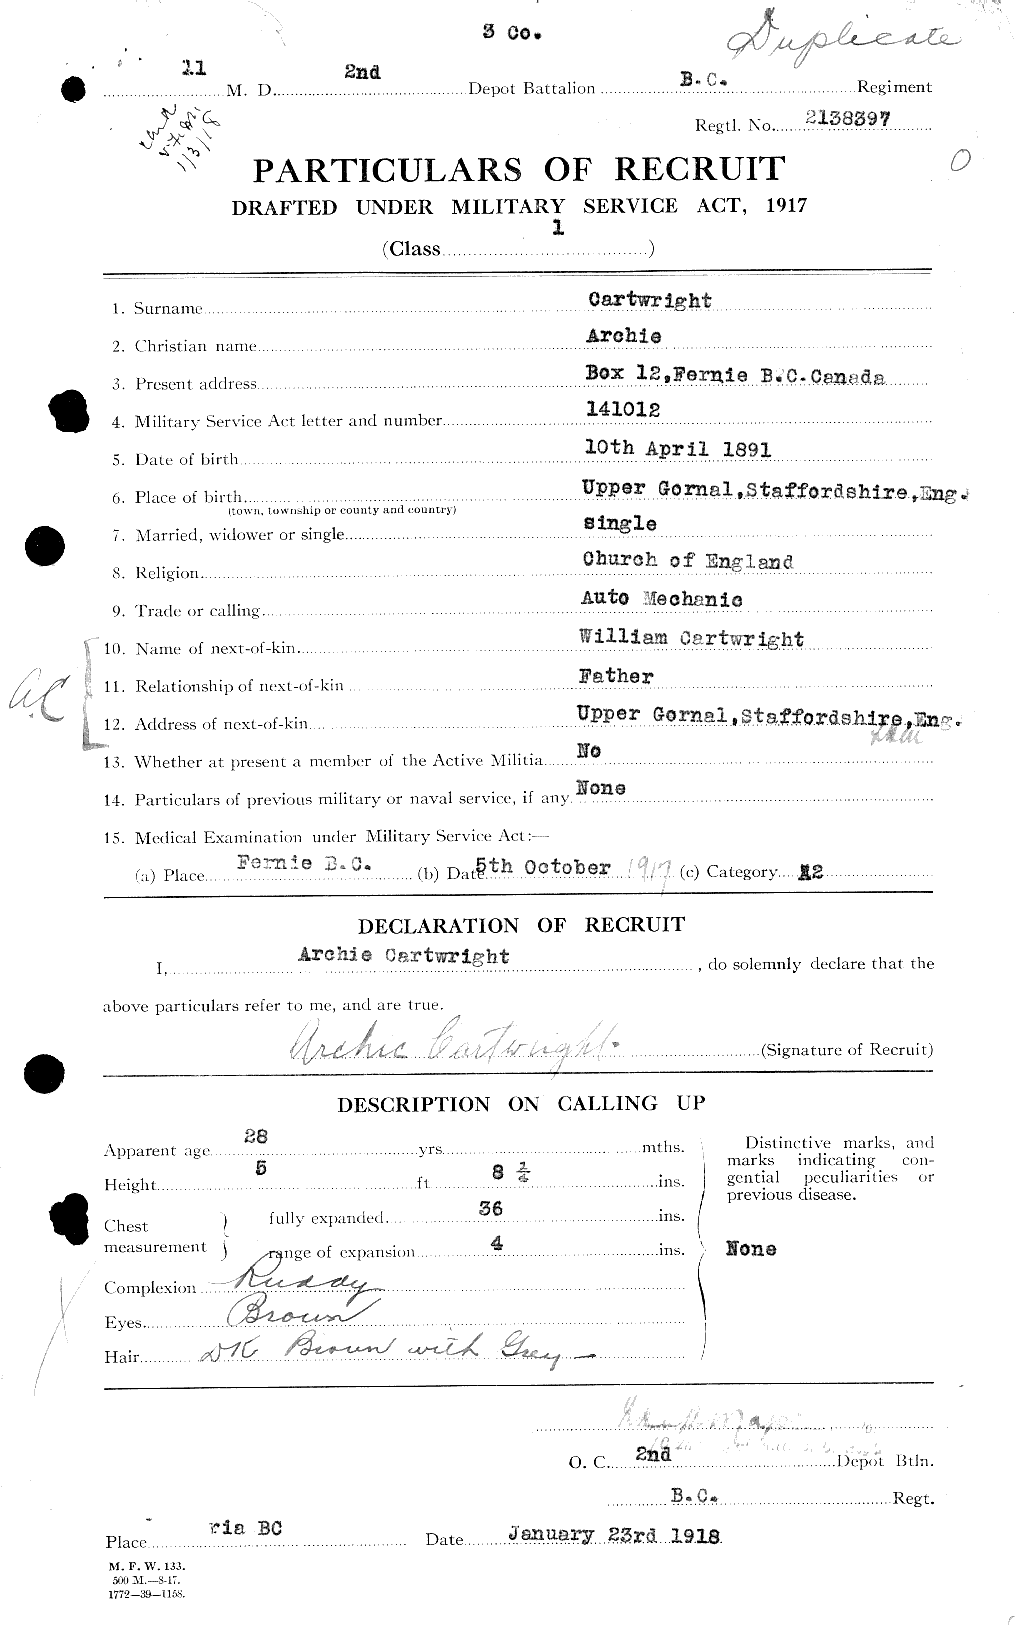 Personnel Records of the First World War - CEF 011548a